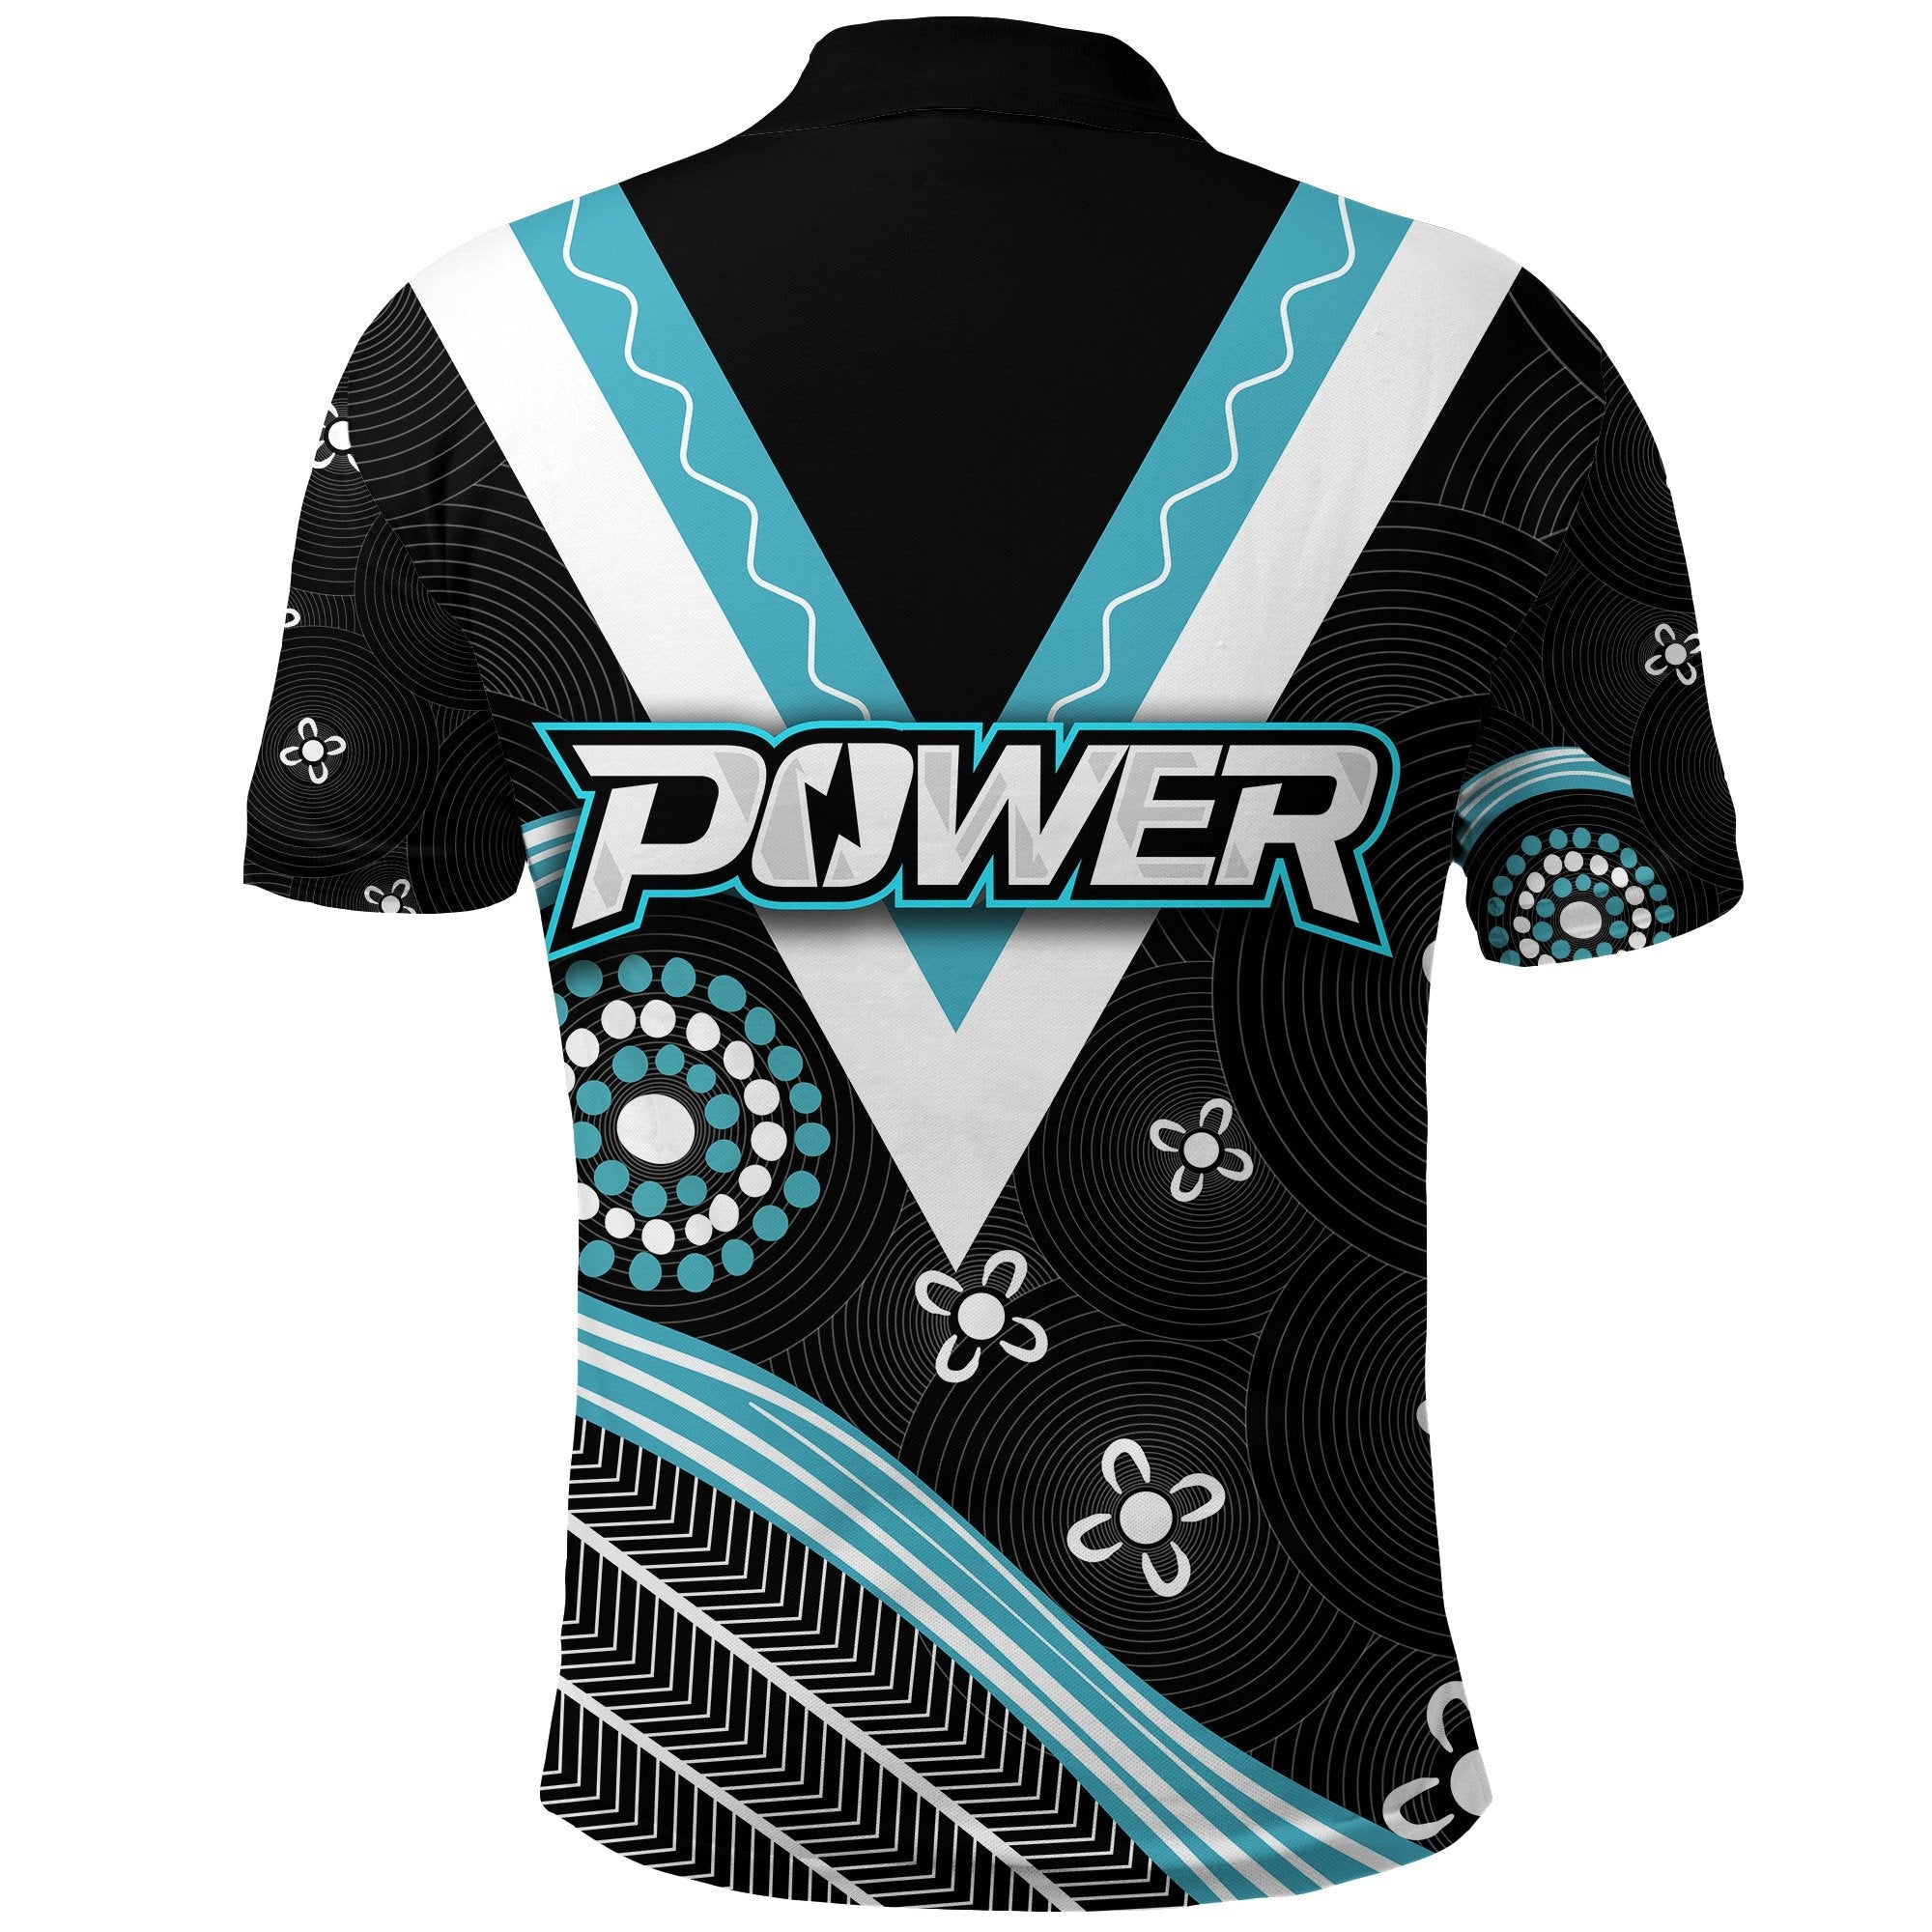 we-are-port-adelaide-polo-shirt-power